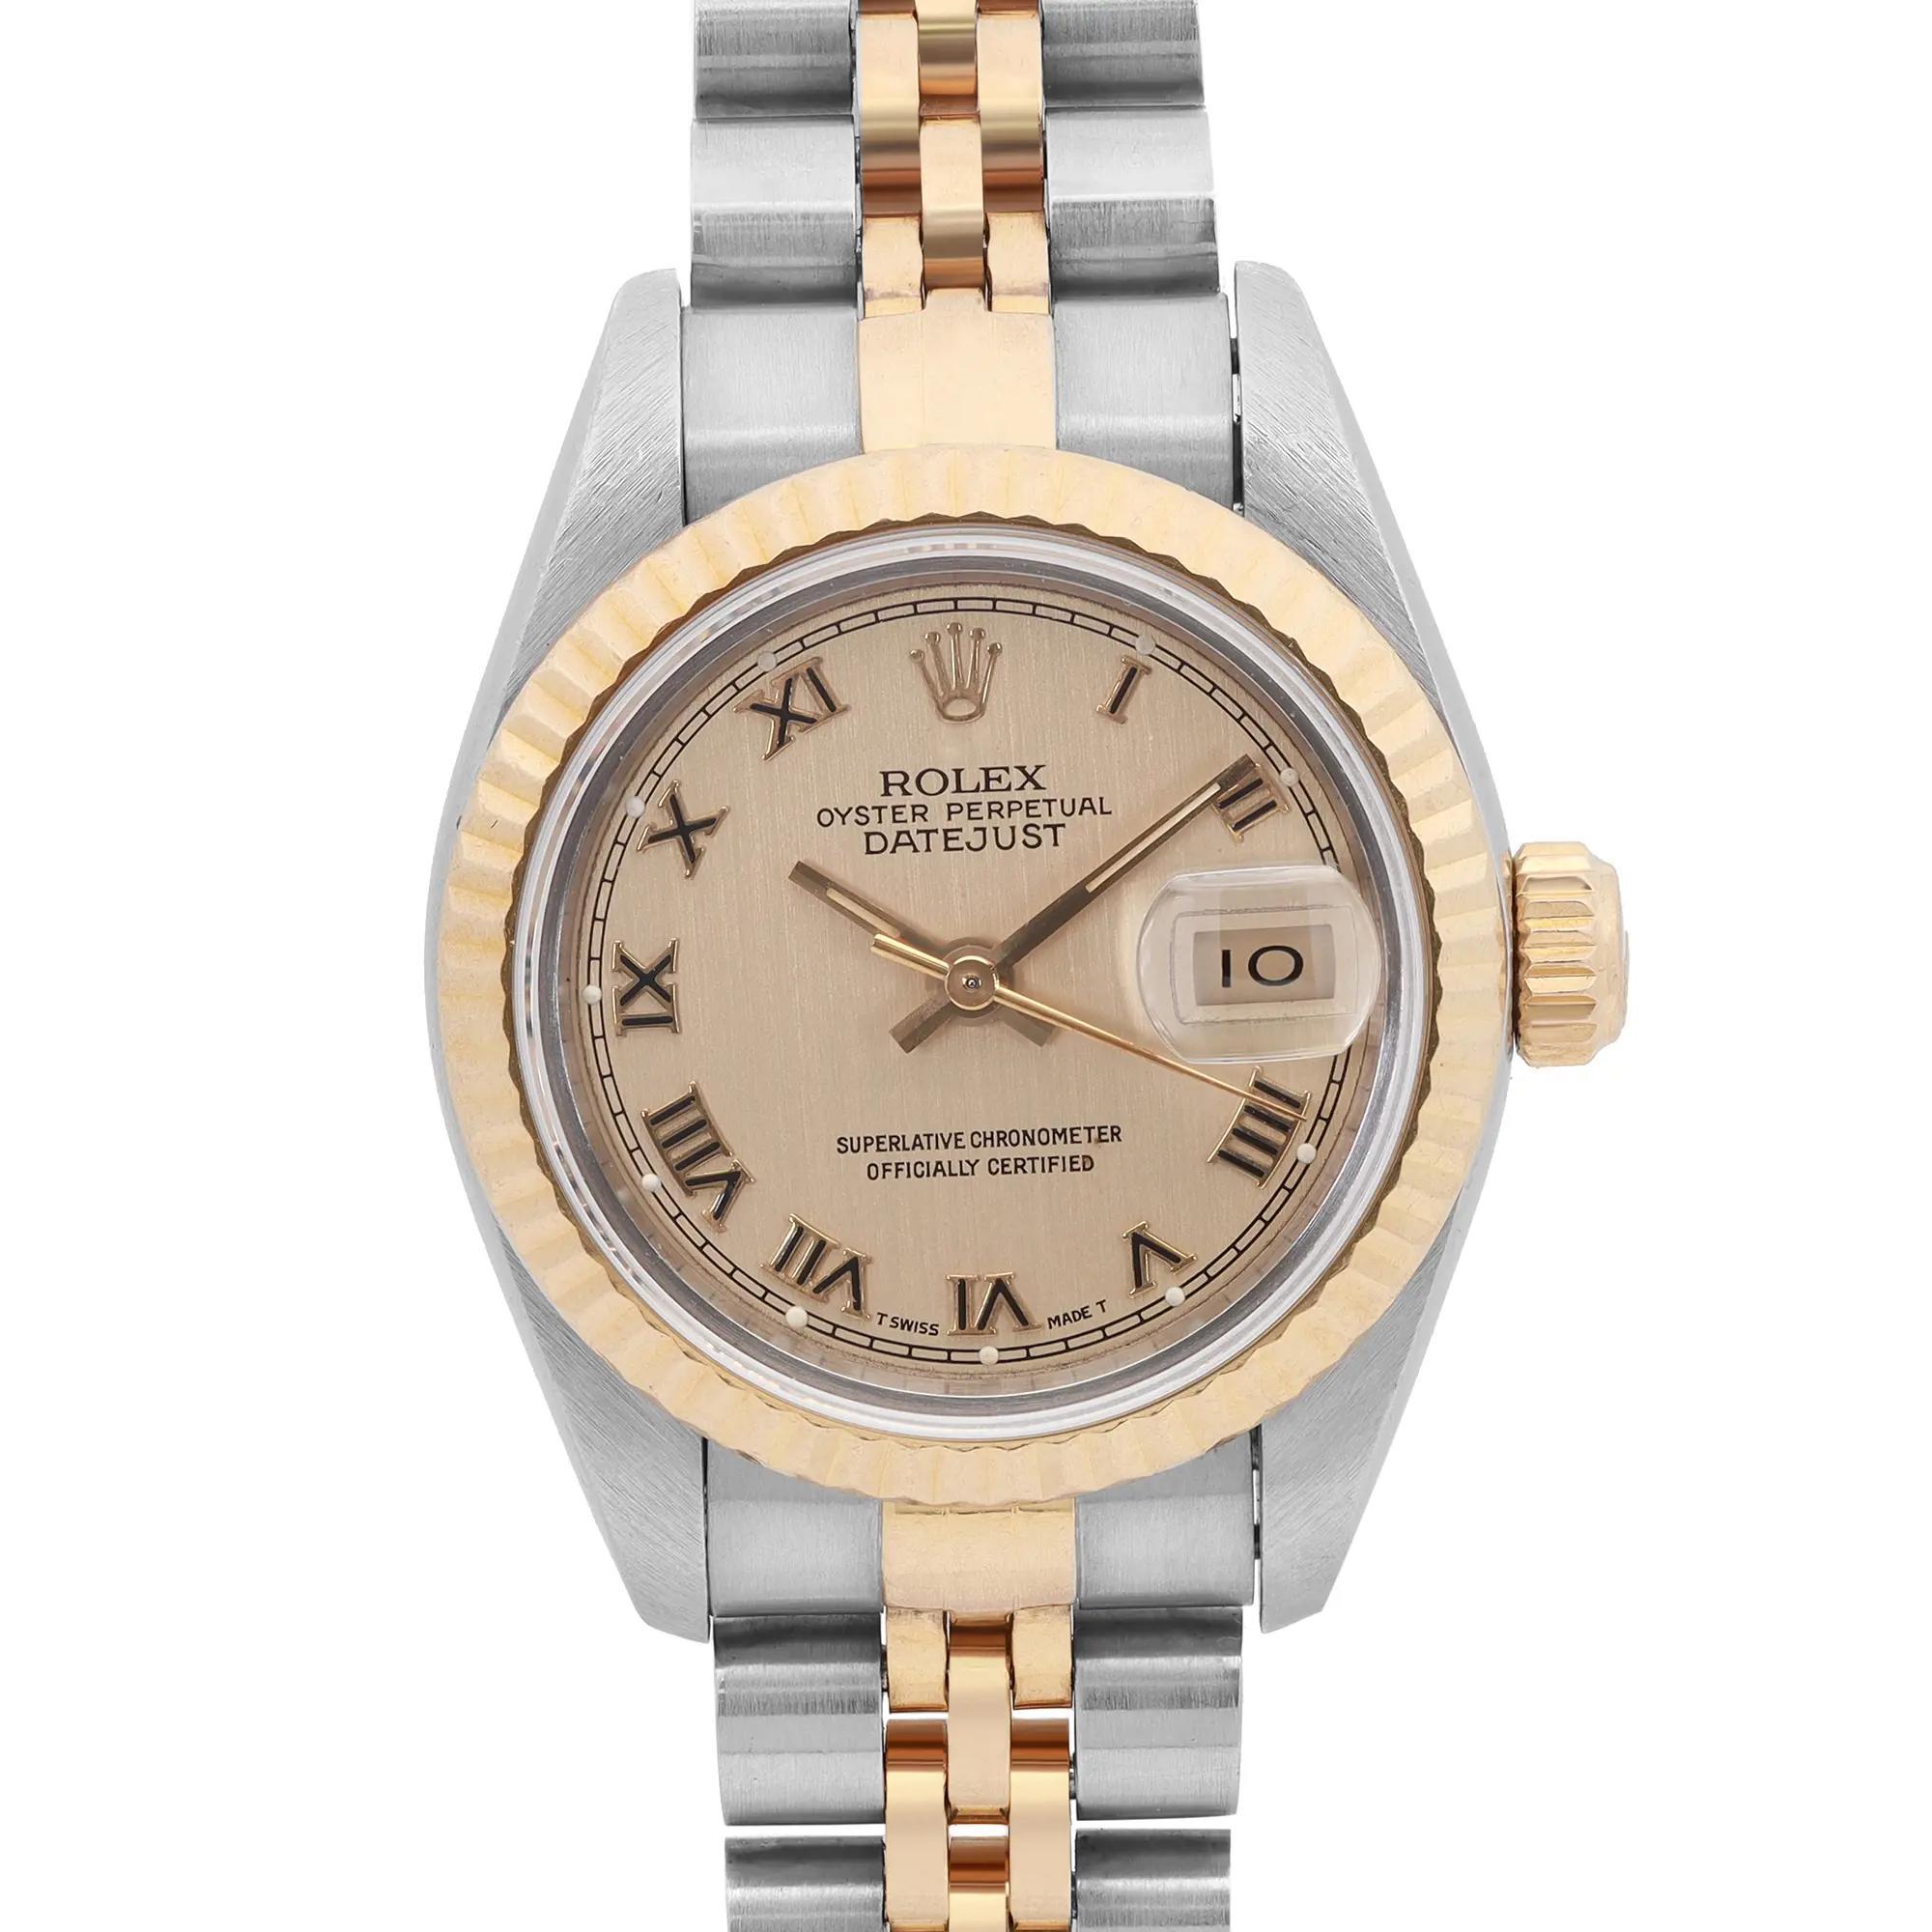 This watch was produced in 1991. Minor dirt on the dial which is visible under close inspection. The Bracelet has Moderate Slack. The original Box and Papers are Included.
Brand: Rolex  Type: Wristwatch  Department: Women  Model Number: 691733 